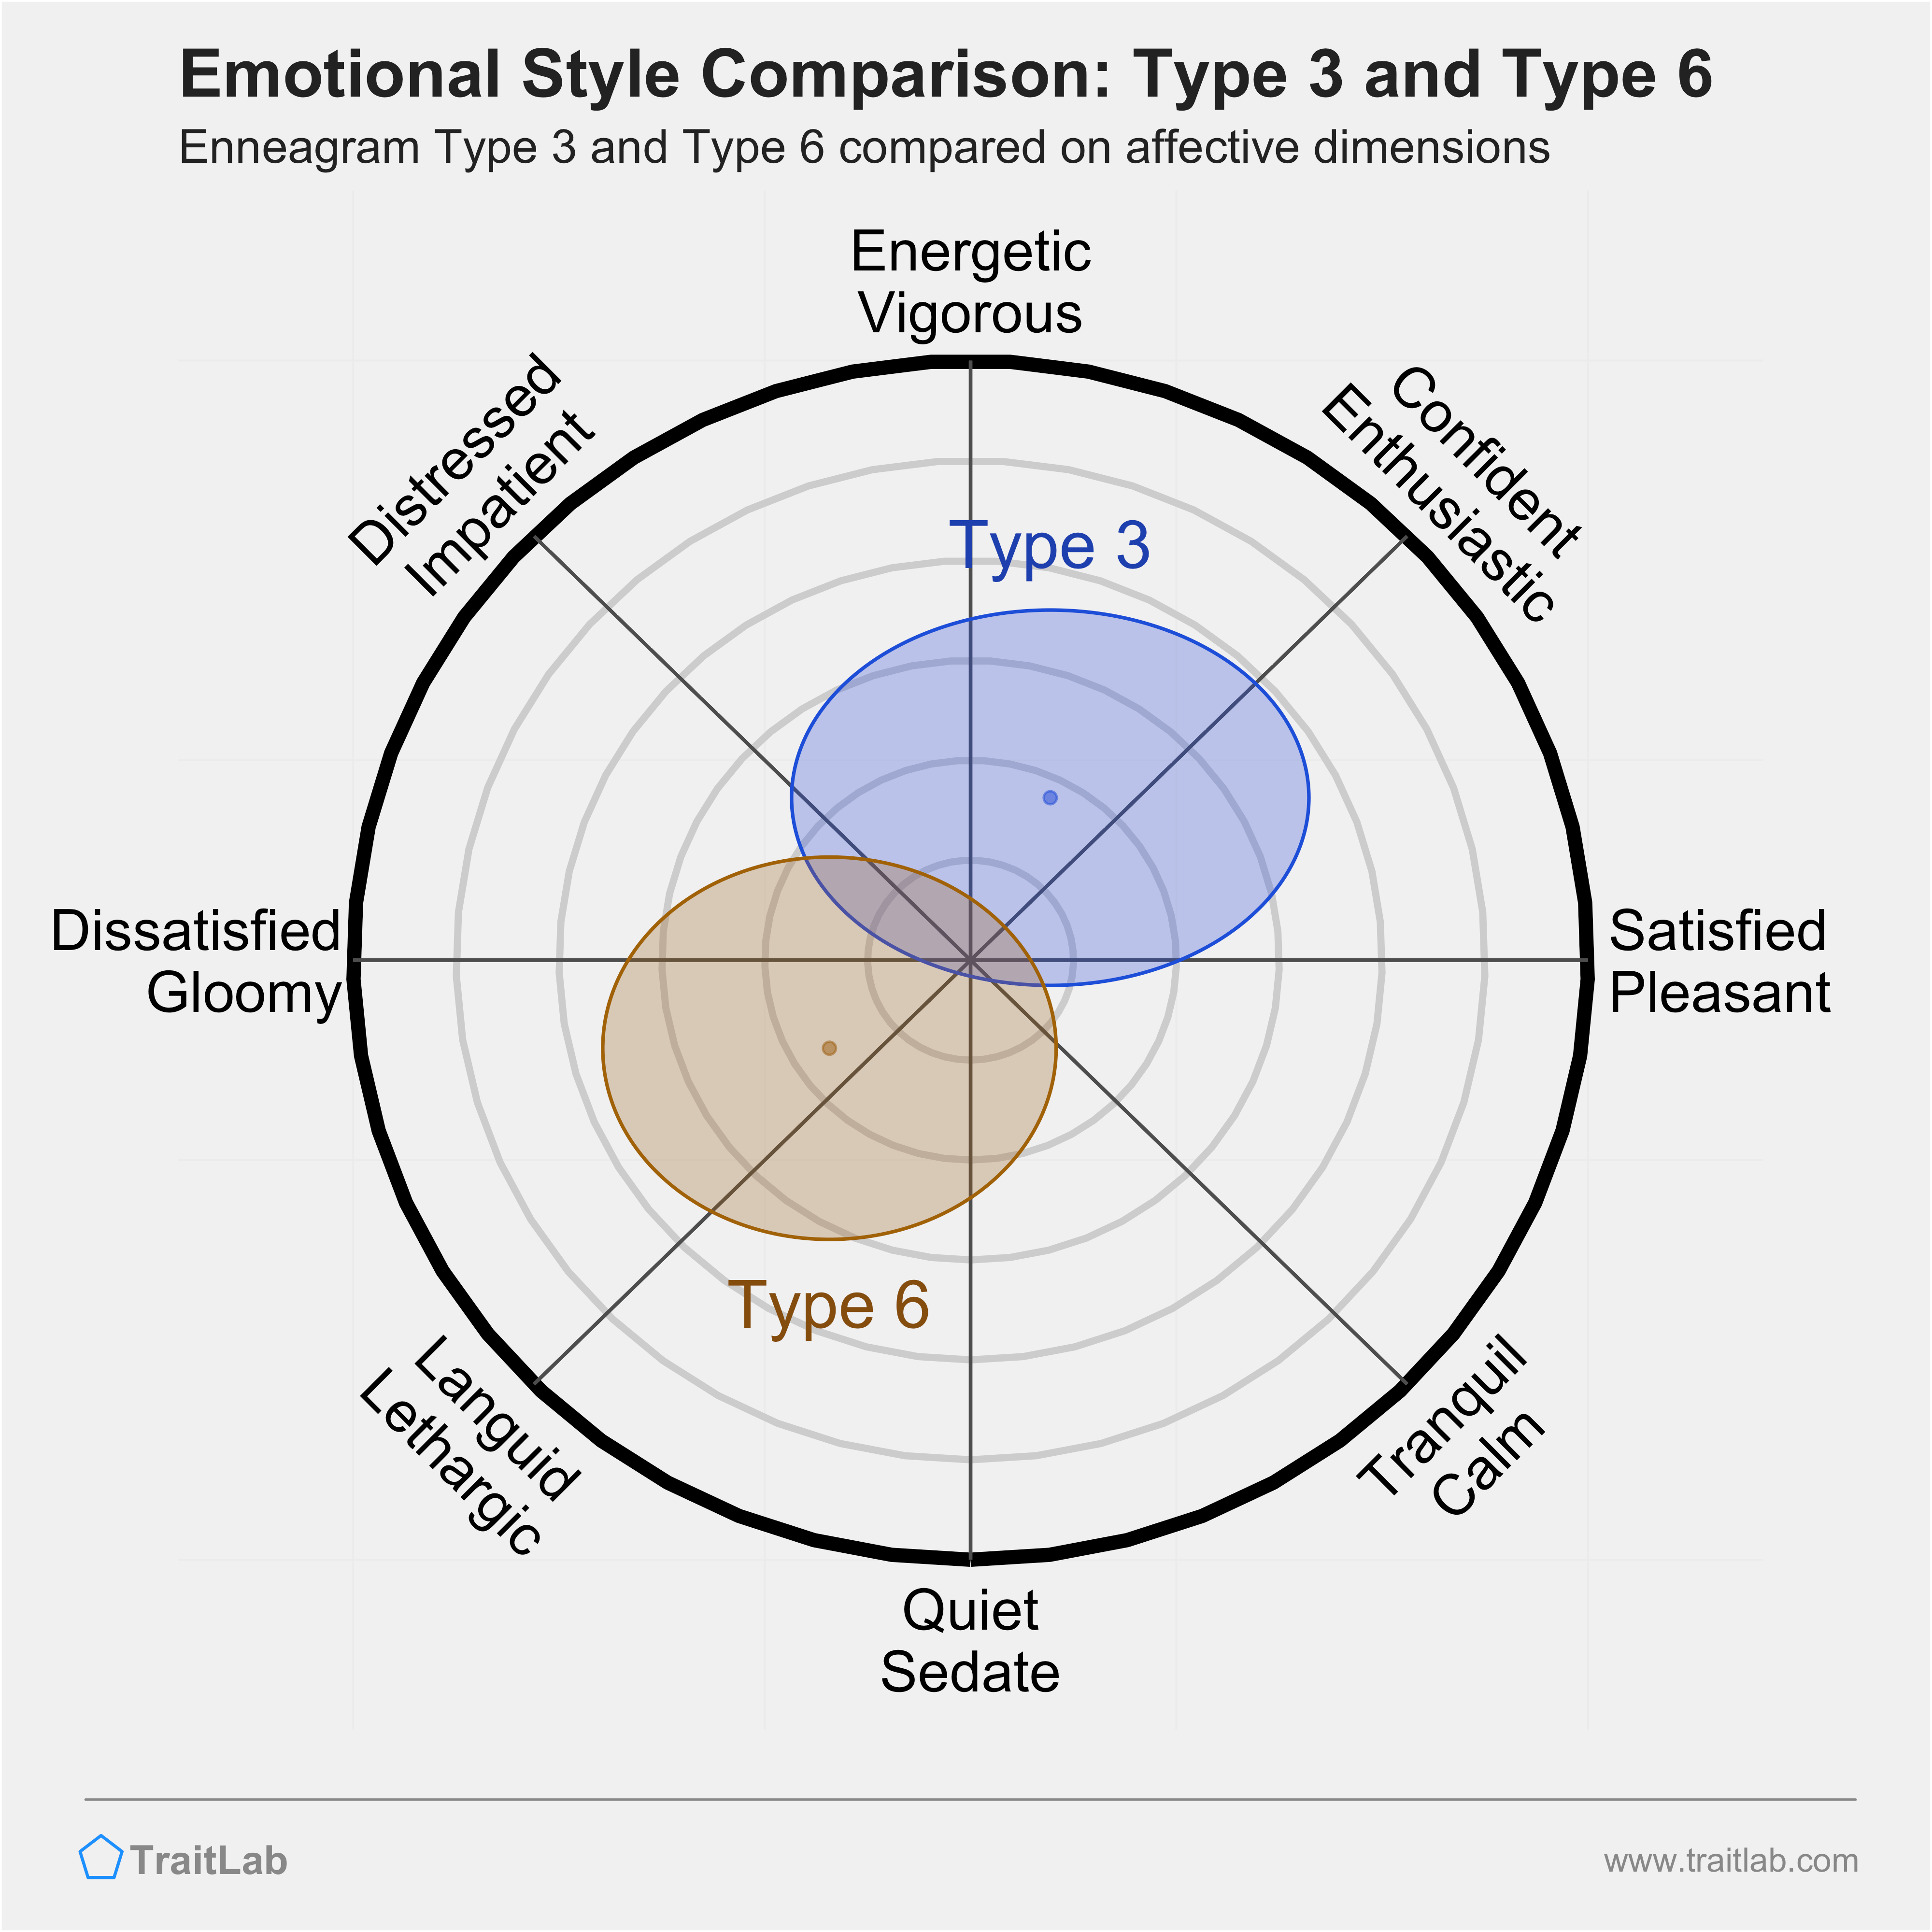 Type 3 and Type 6 comparison across emotional (affective) dimensions